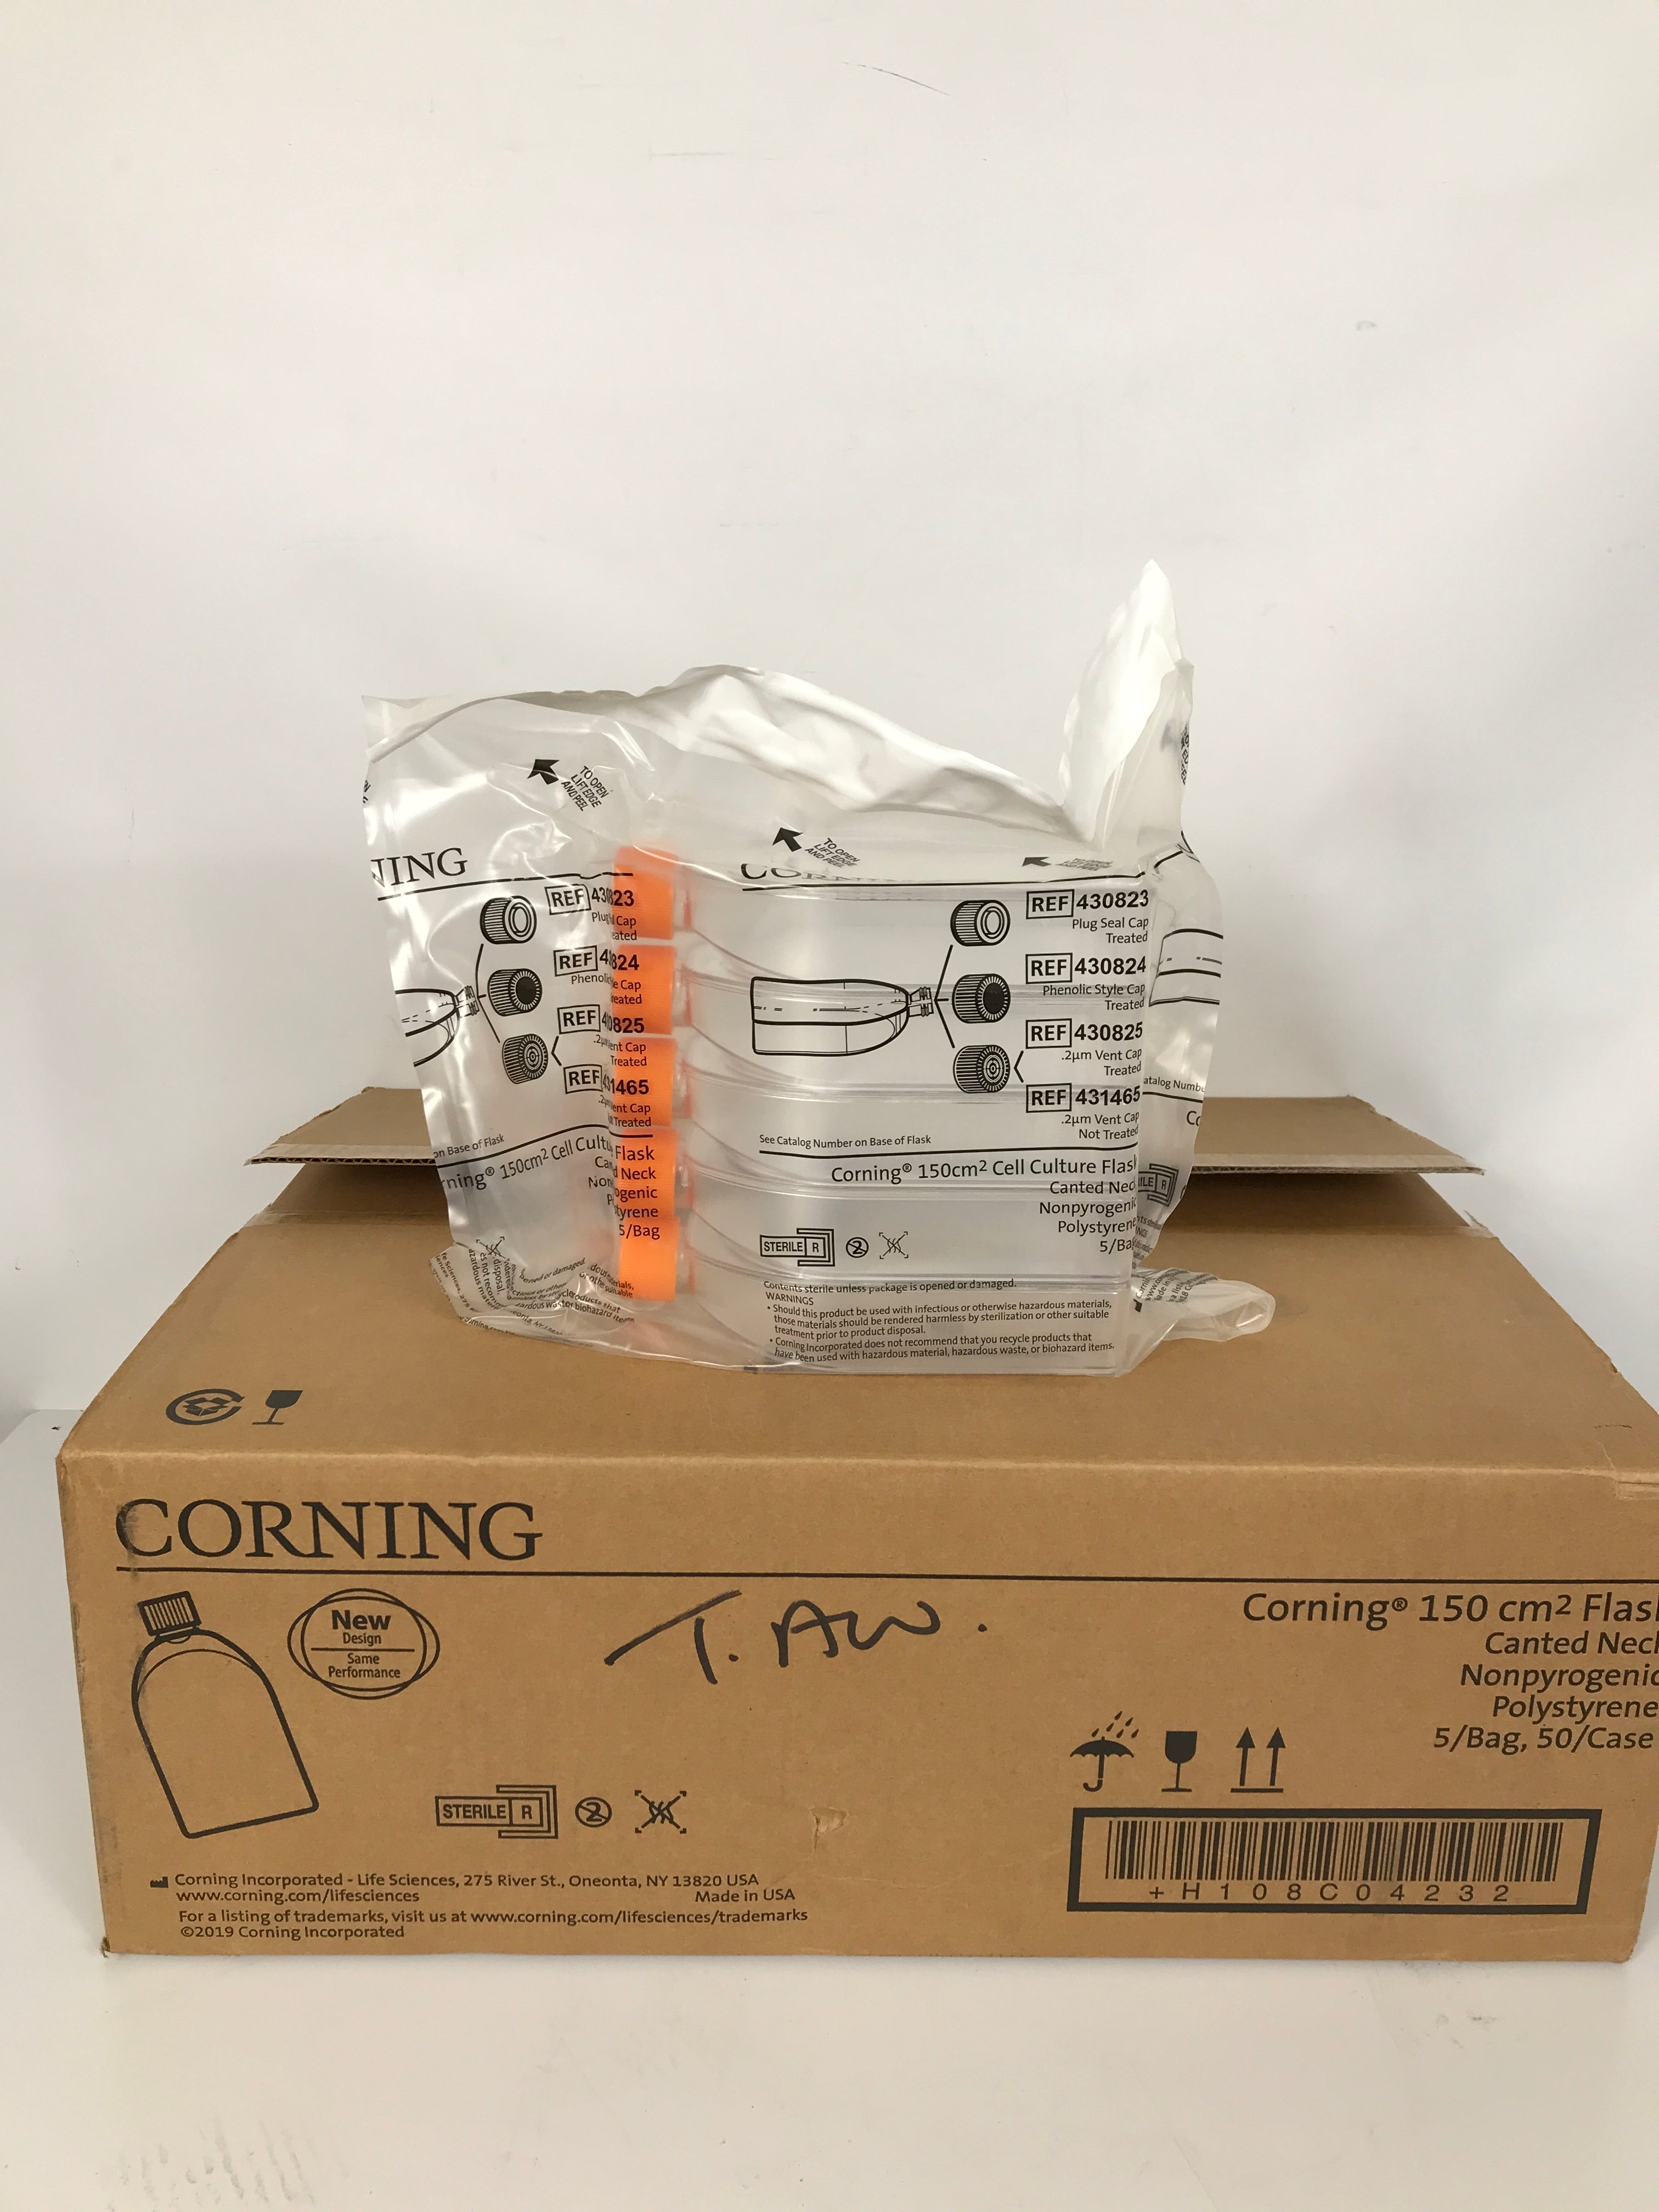 Case of 50 New Corning Cell Culture Treated Flasks 150cm 430823